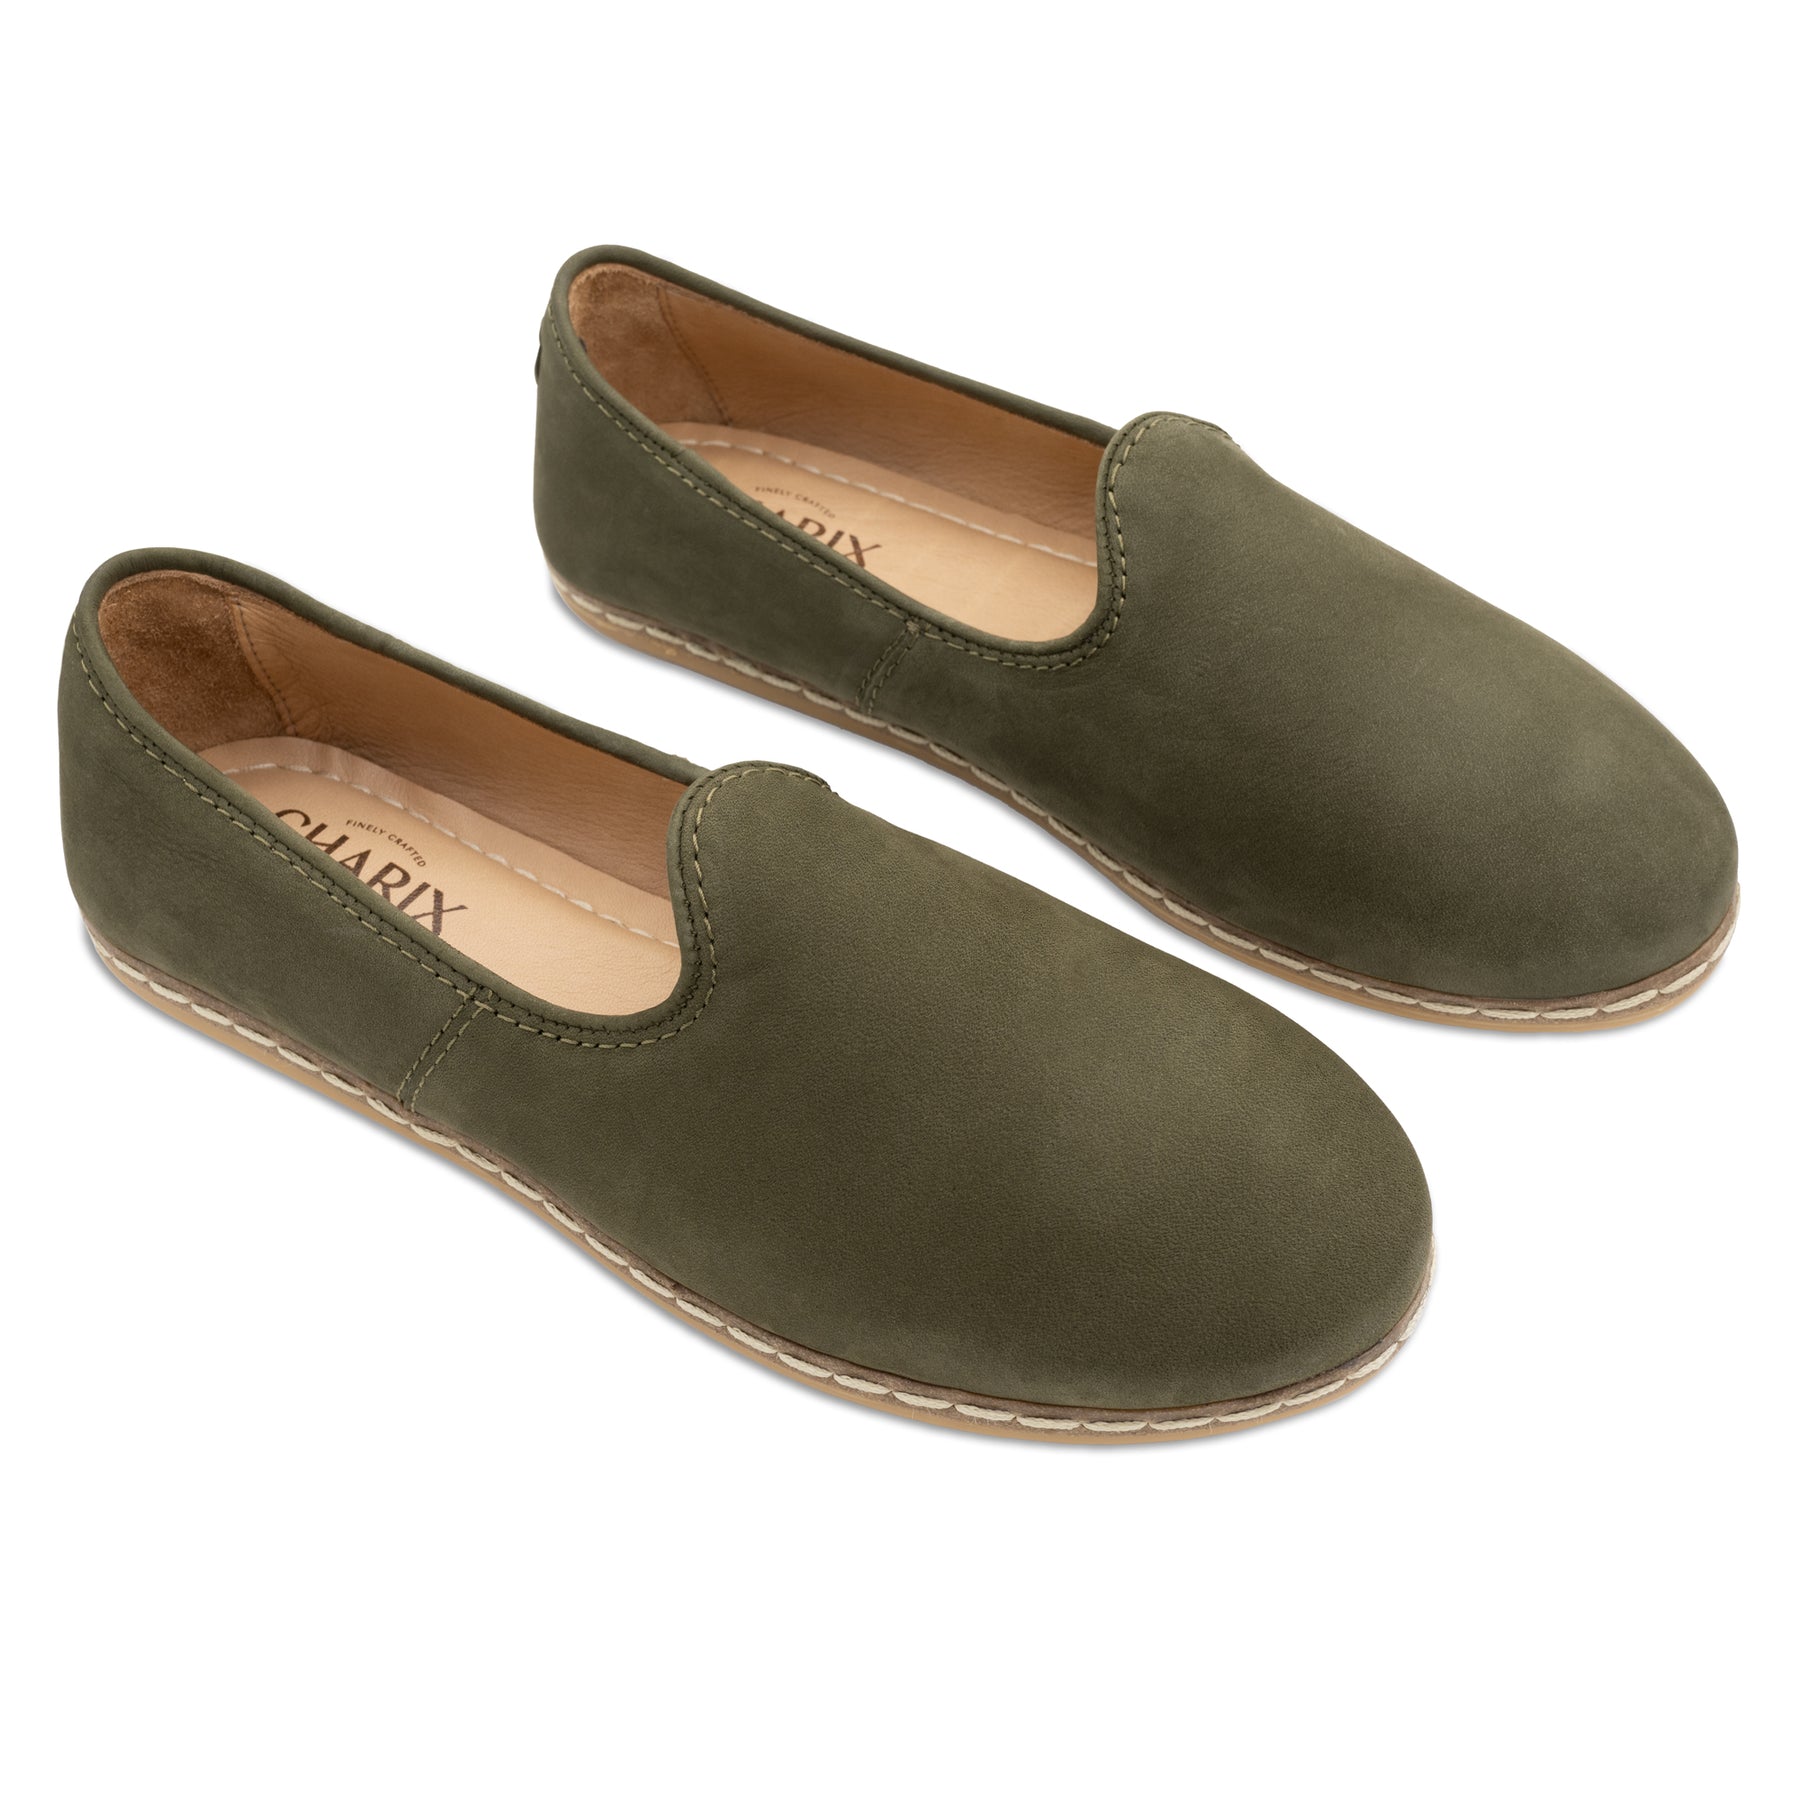 Olive Suede Slip On Shoes - Charix Shoes